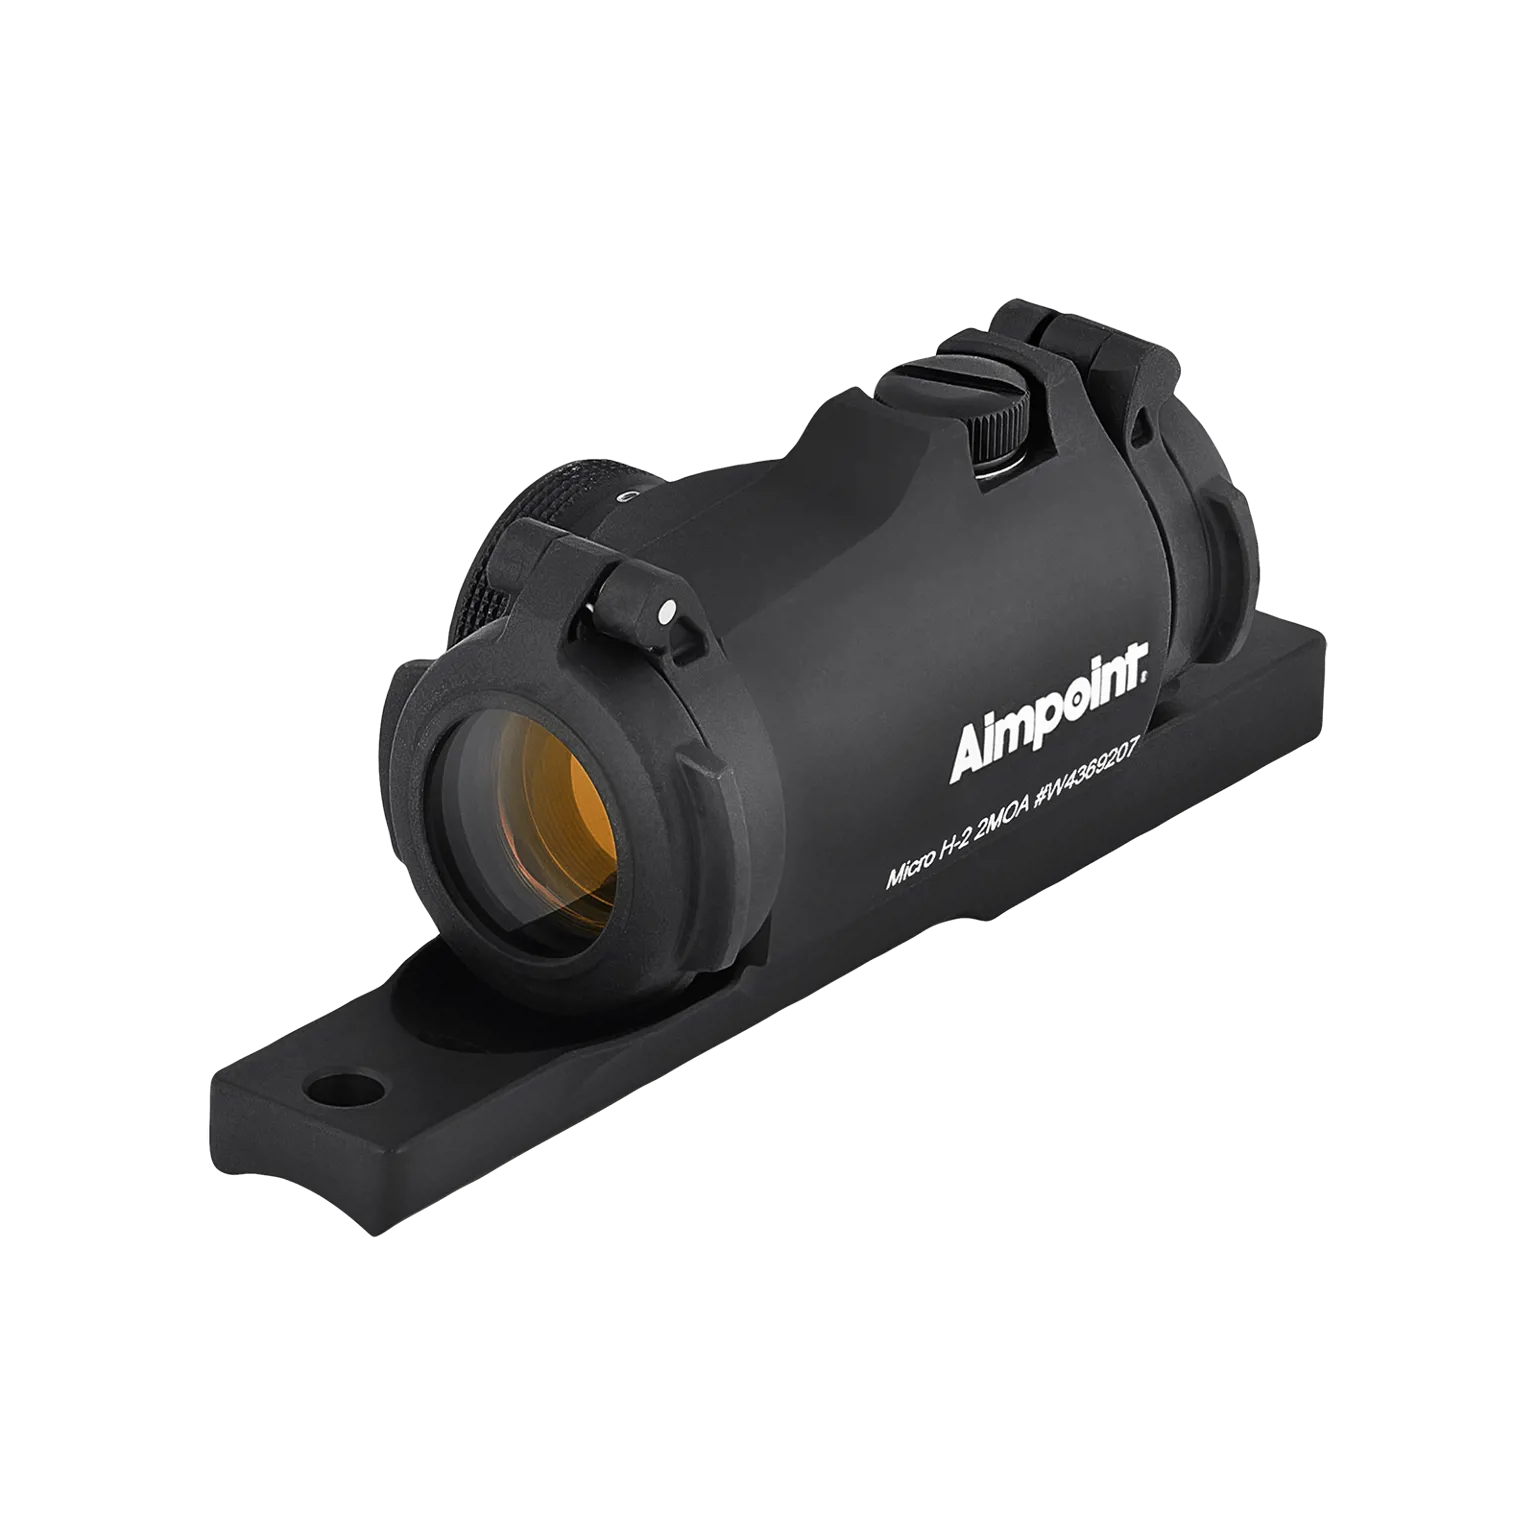 Micro H-2™ 2 MOA - Red dot reflex sight with mount for semi-automatic rifles - 2